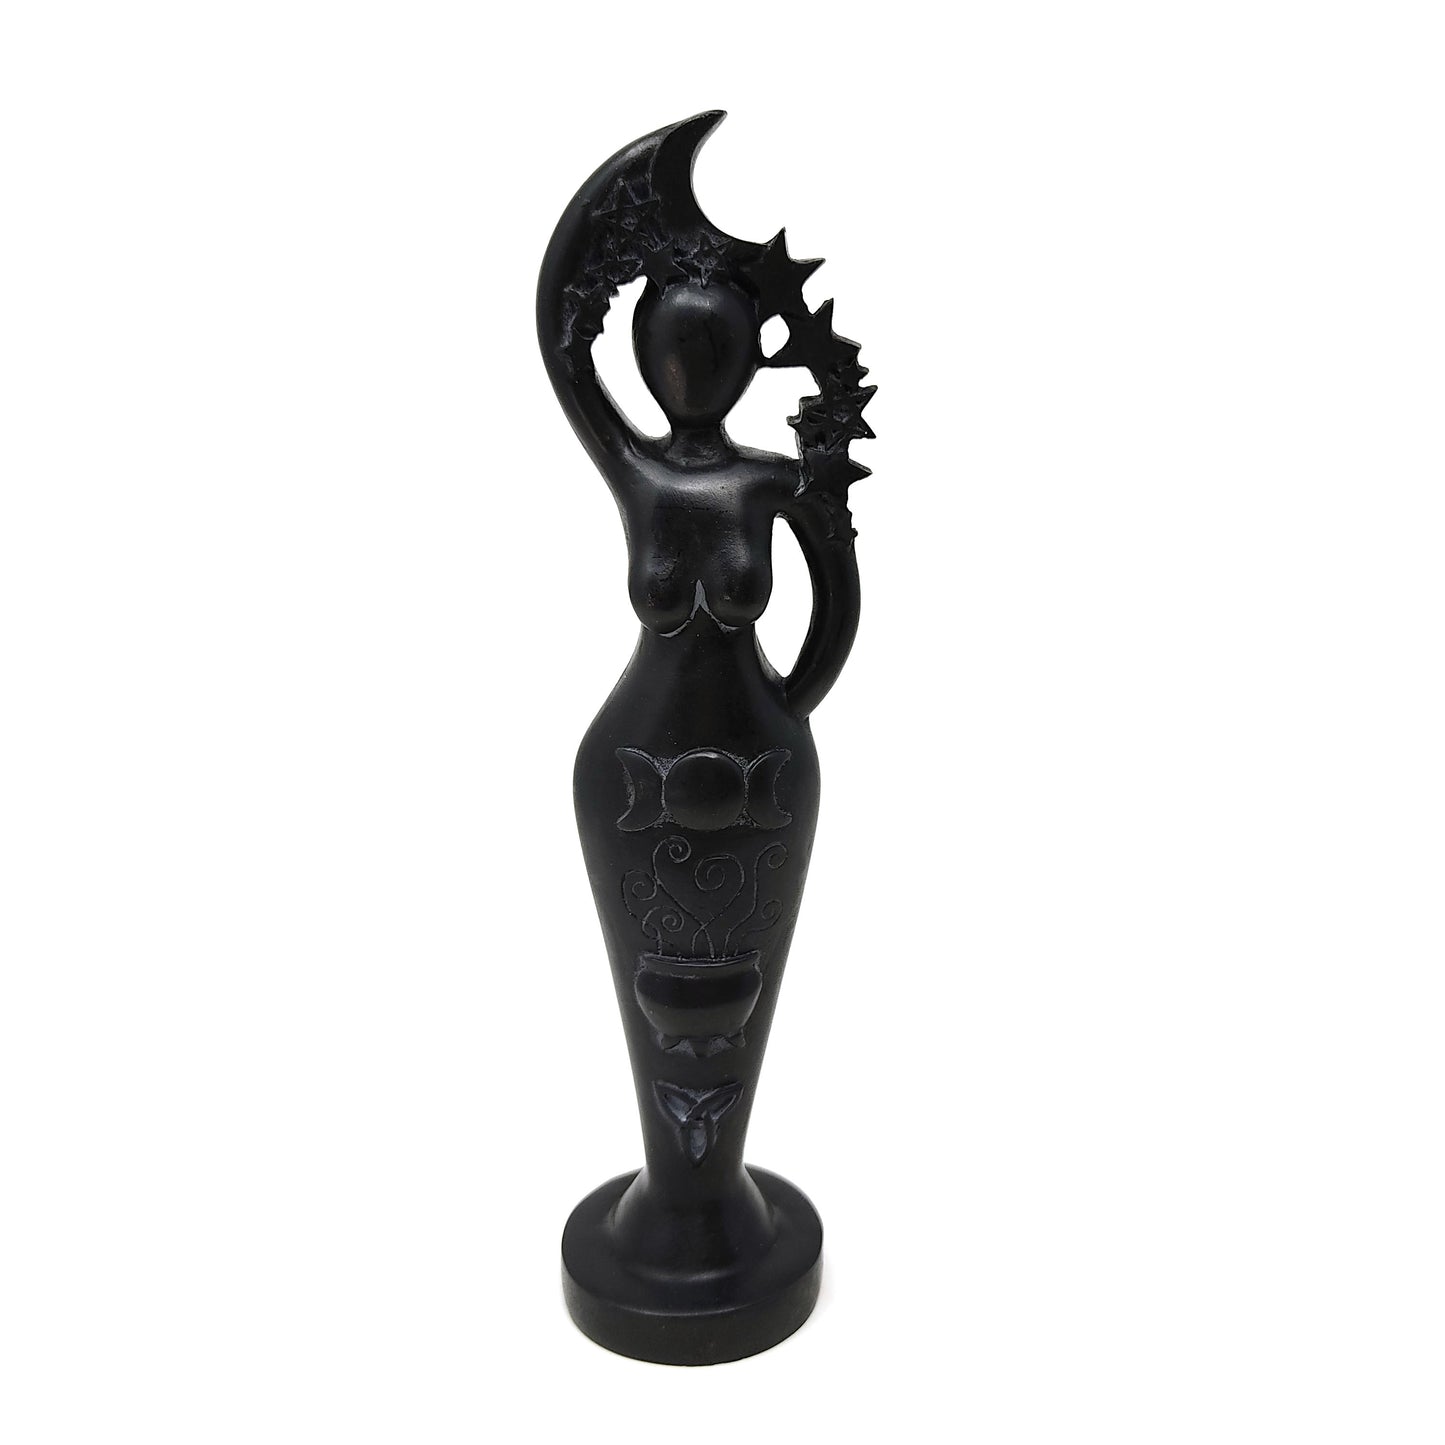 Black Pentacle Goddess Handmade Signed Statue Wicca Pagan Night Queen Idol 8.5"